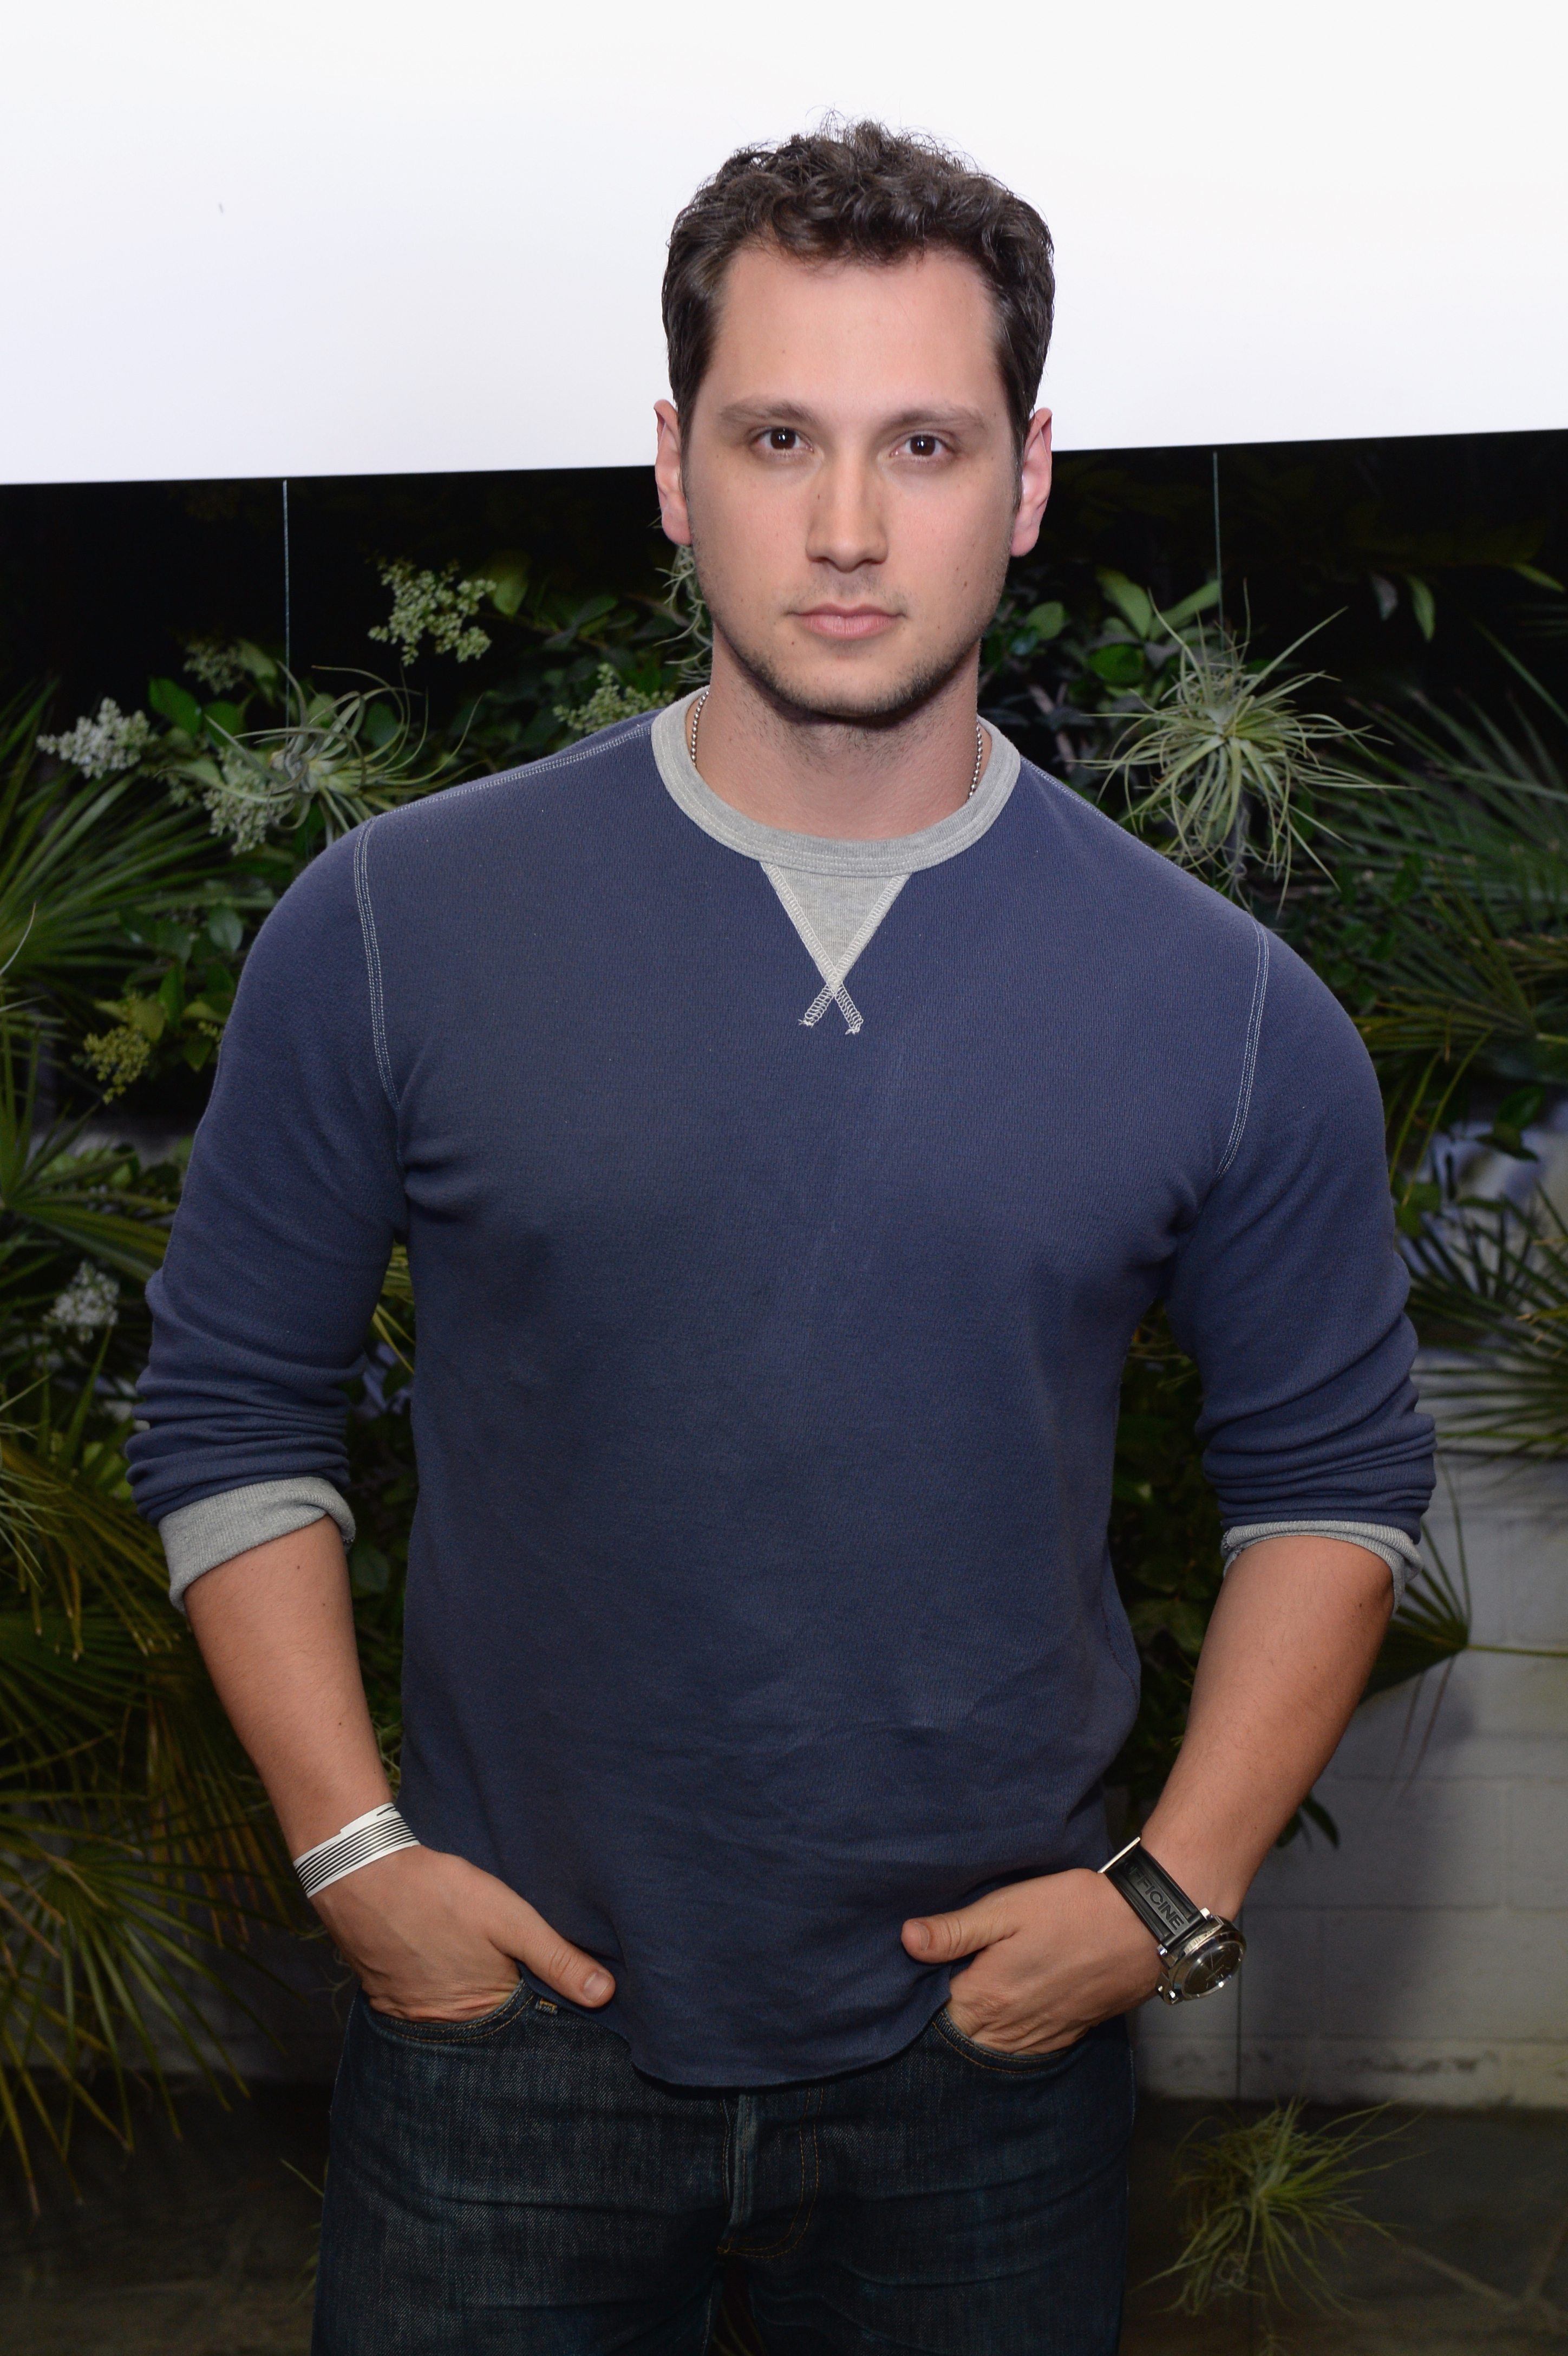 The 36-year old son of father (?) and mother(?) Matt McGorry in 2022 photo. Matt McGorry earned a  million dollar salary - leaving the net worth at 1.5 million in 2022